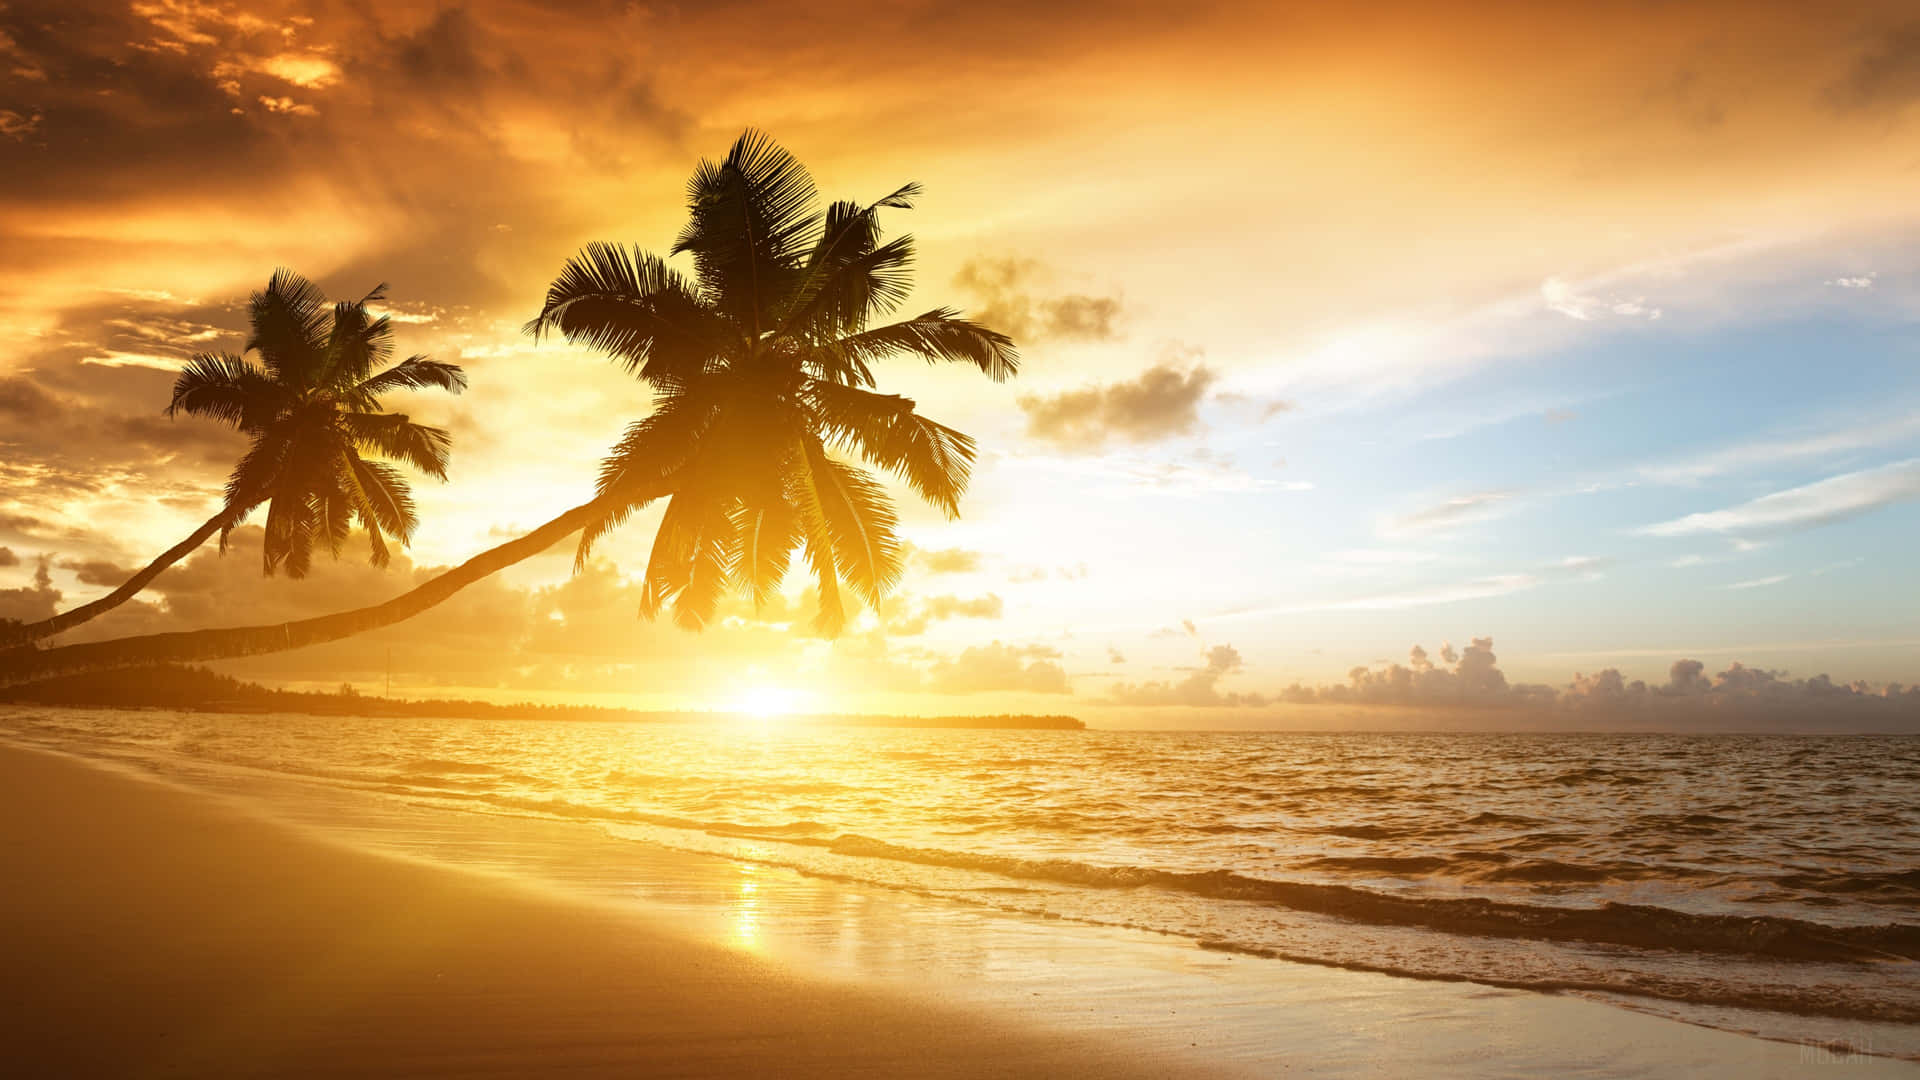 Two Palm Trees On A Beach At Sunset